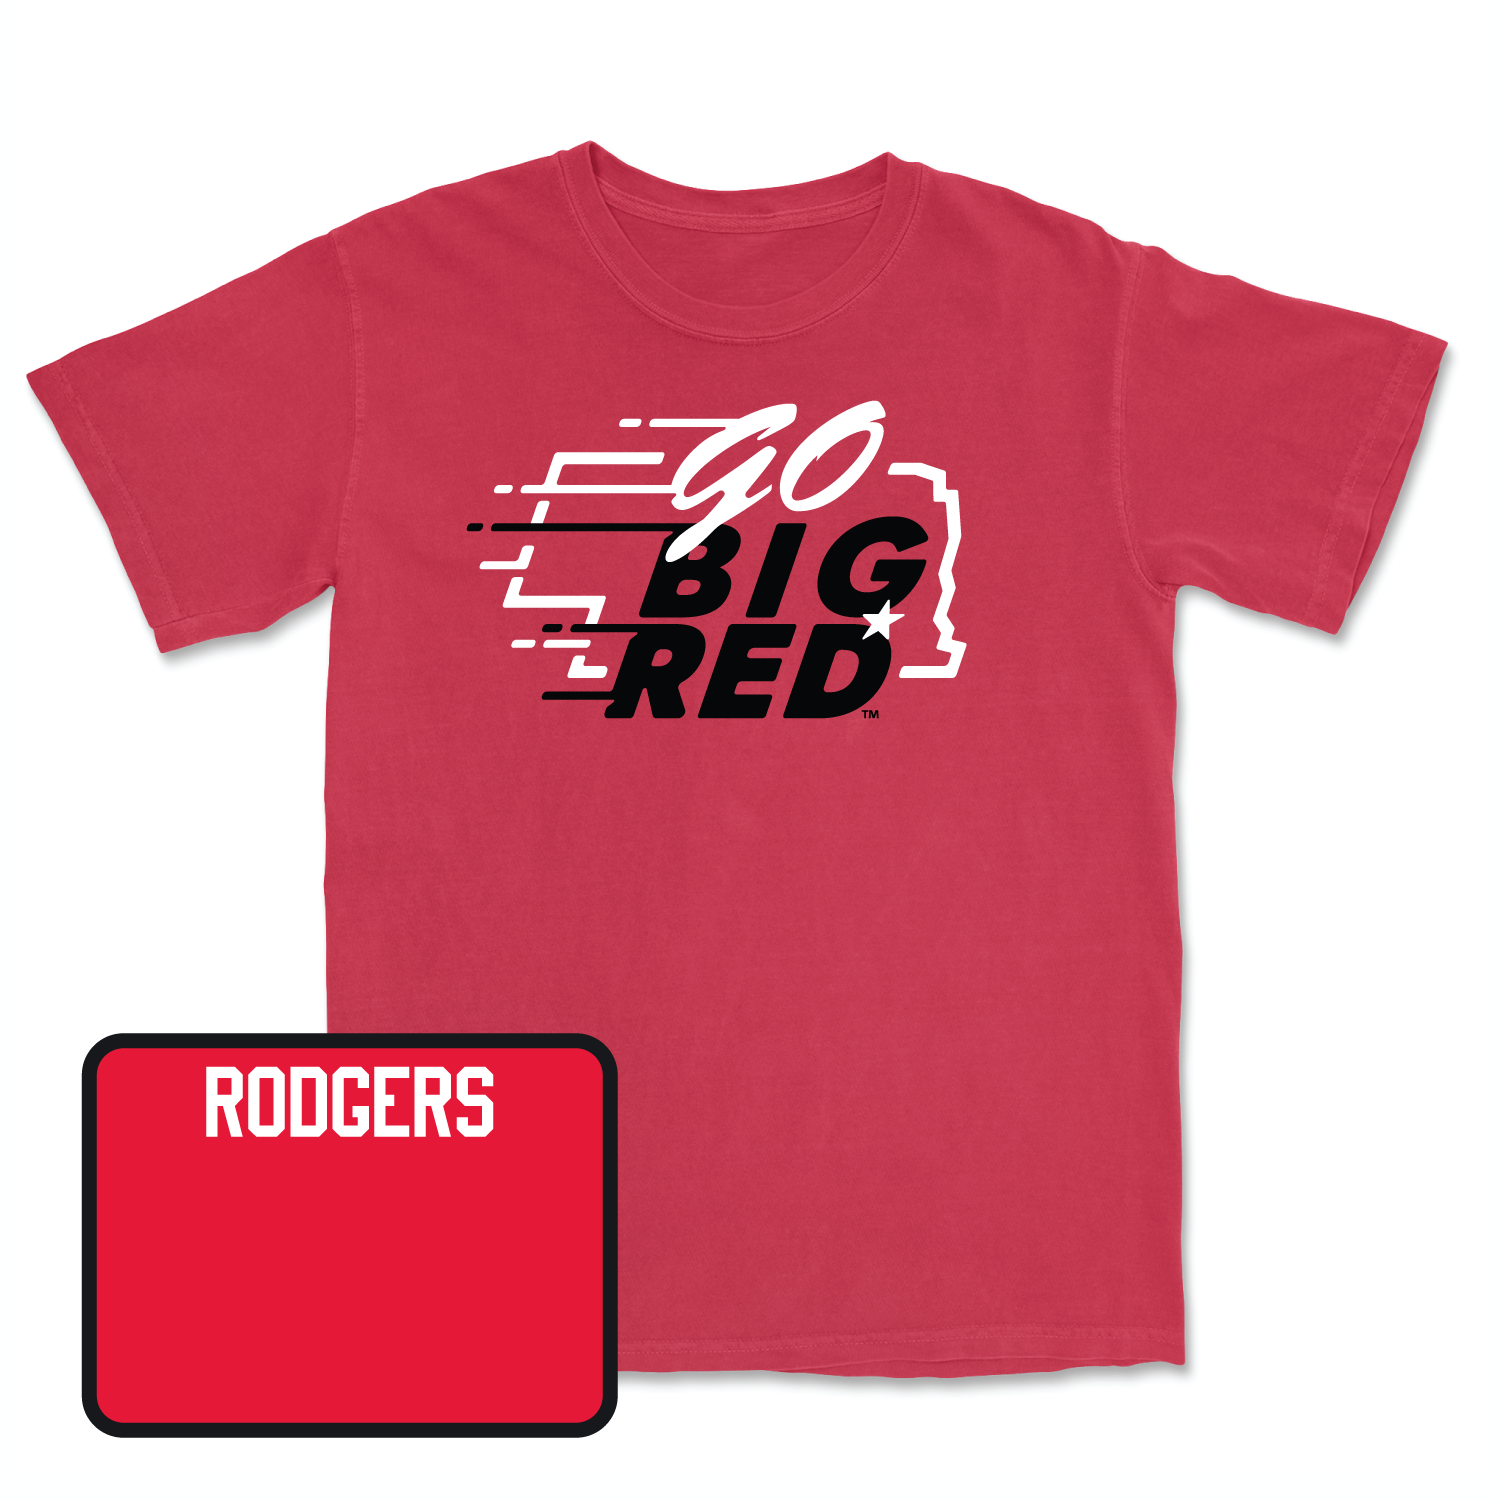 Red Track & Field GBR Tee Youth Large / Omar Rodgers